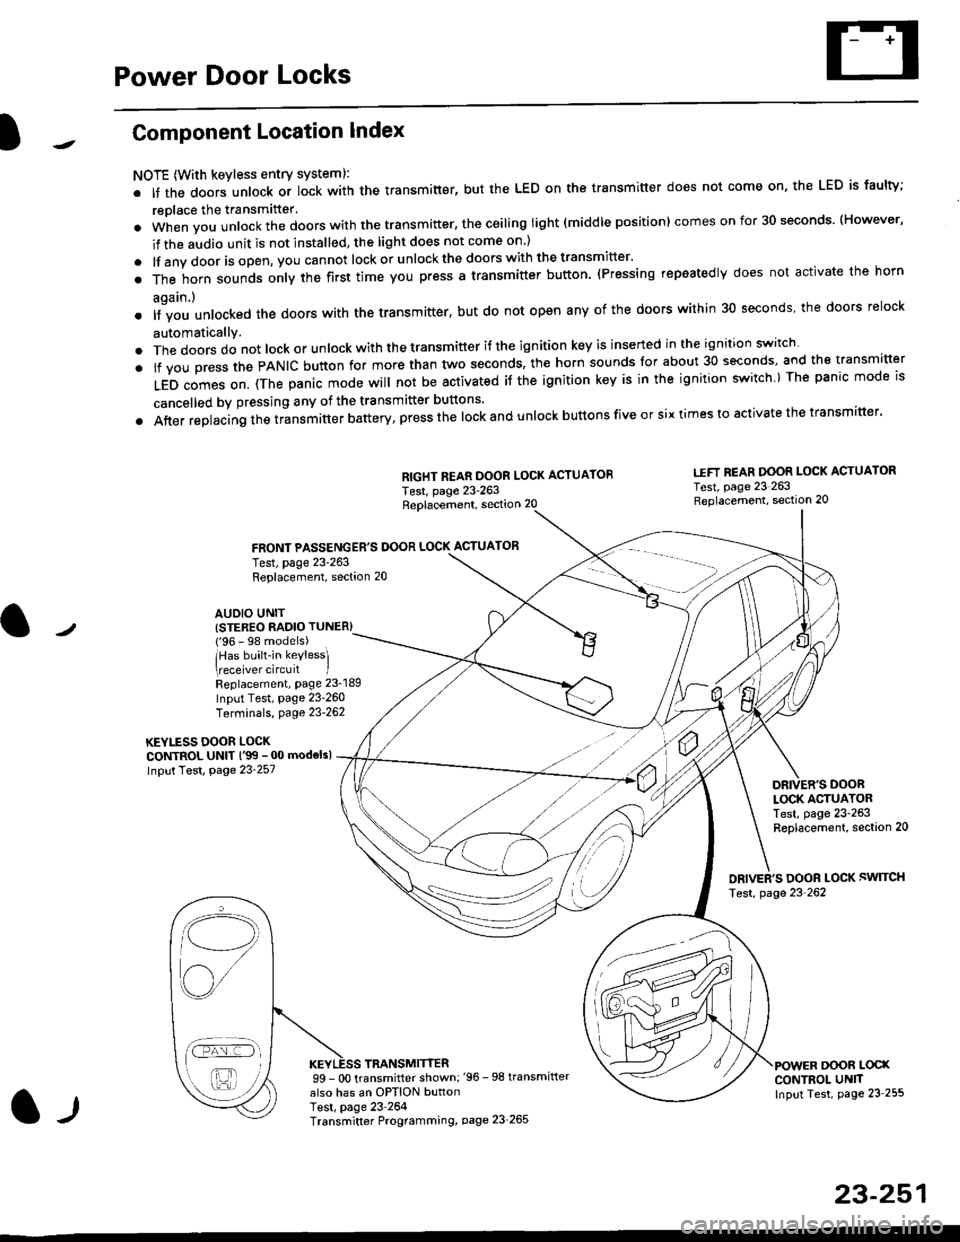 HONDA CIVIC 1997 6.G Workshop Manual Power Door Locks
Component Location Index
NOTE (With keyless entry systeml:
. It the doors unlock or lock with the transmitter, but the LED on the transmitter does not come on, the LED is faulty;
repl